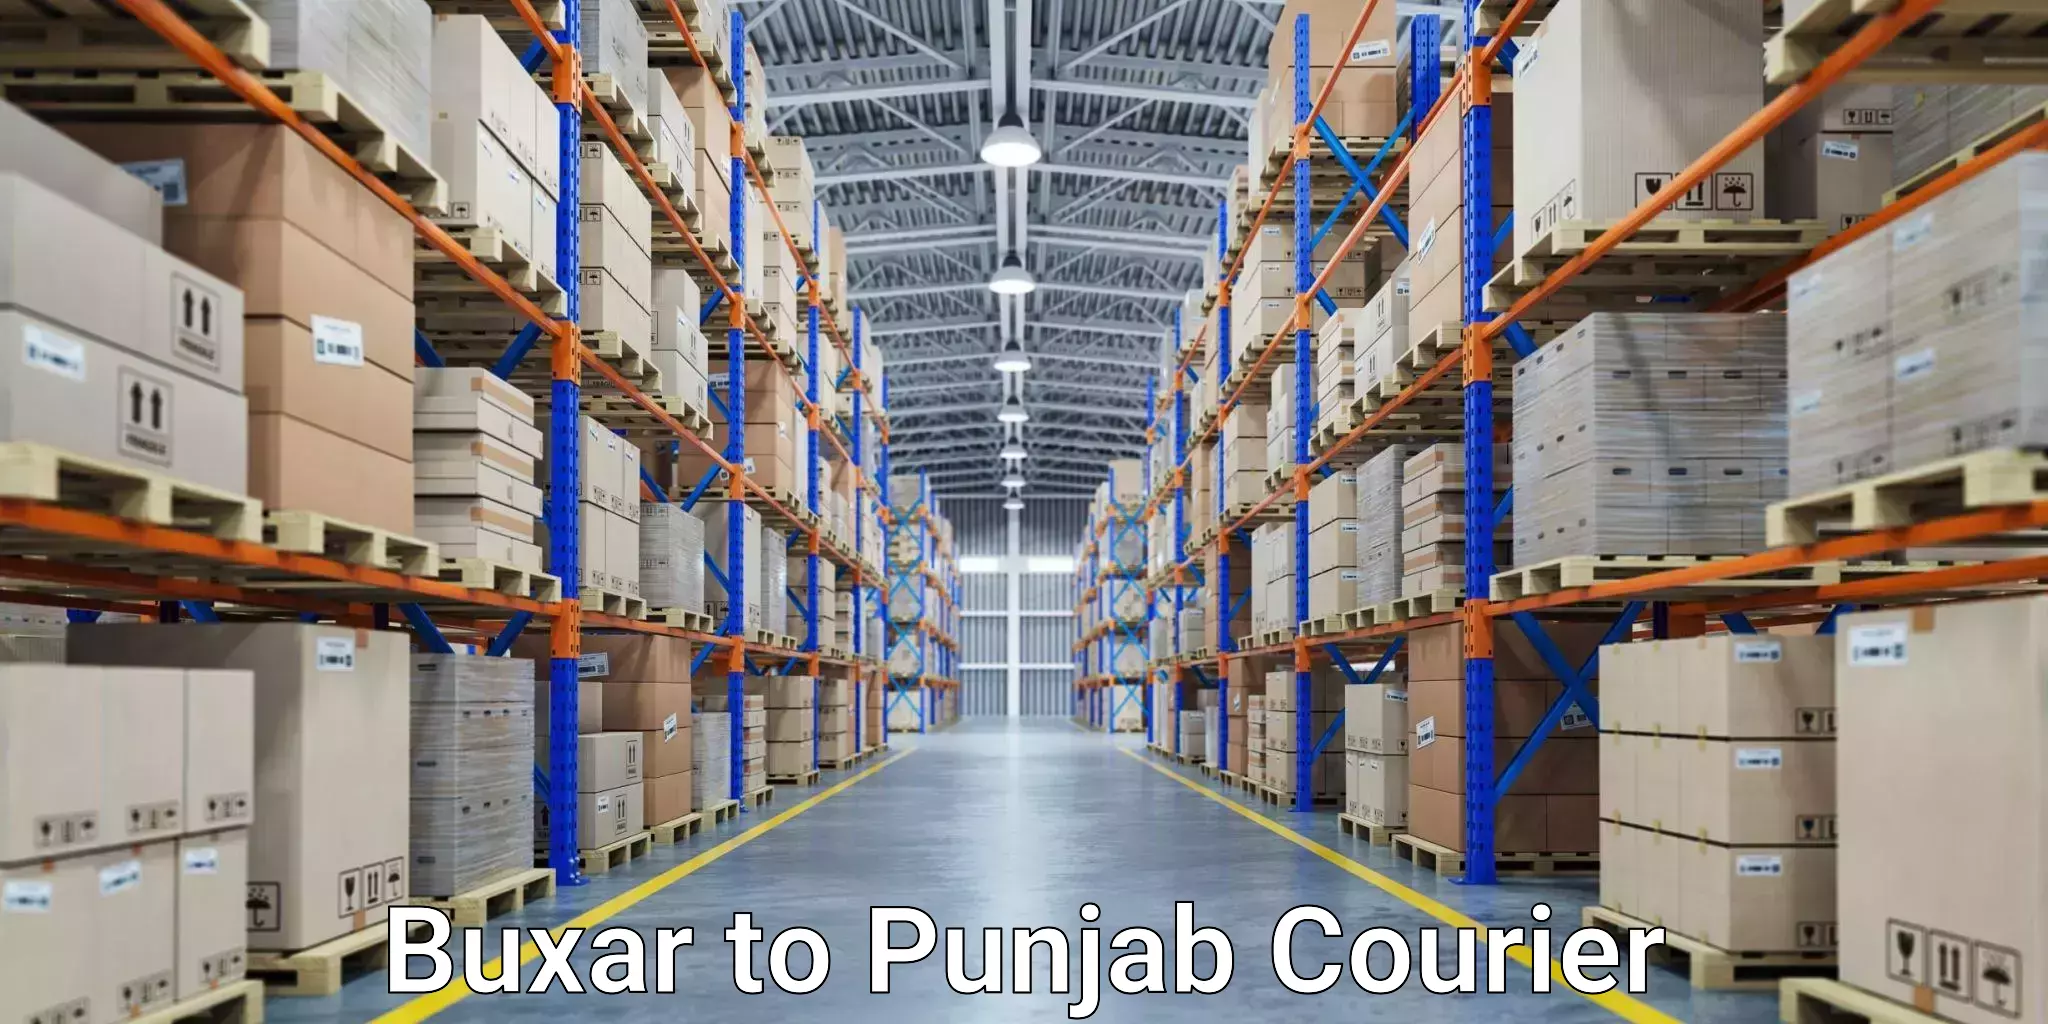 Efficient order fulfillment in Buxar to Ajnala